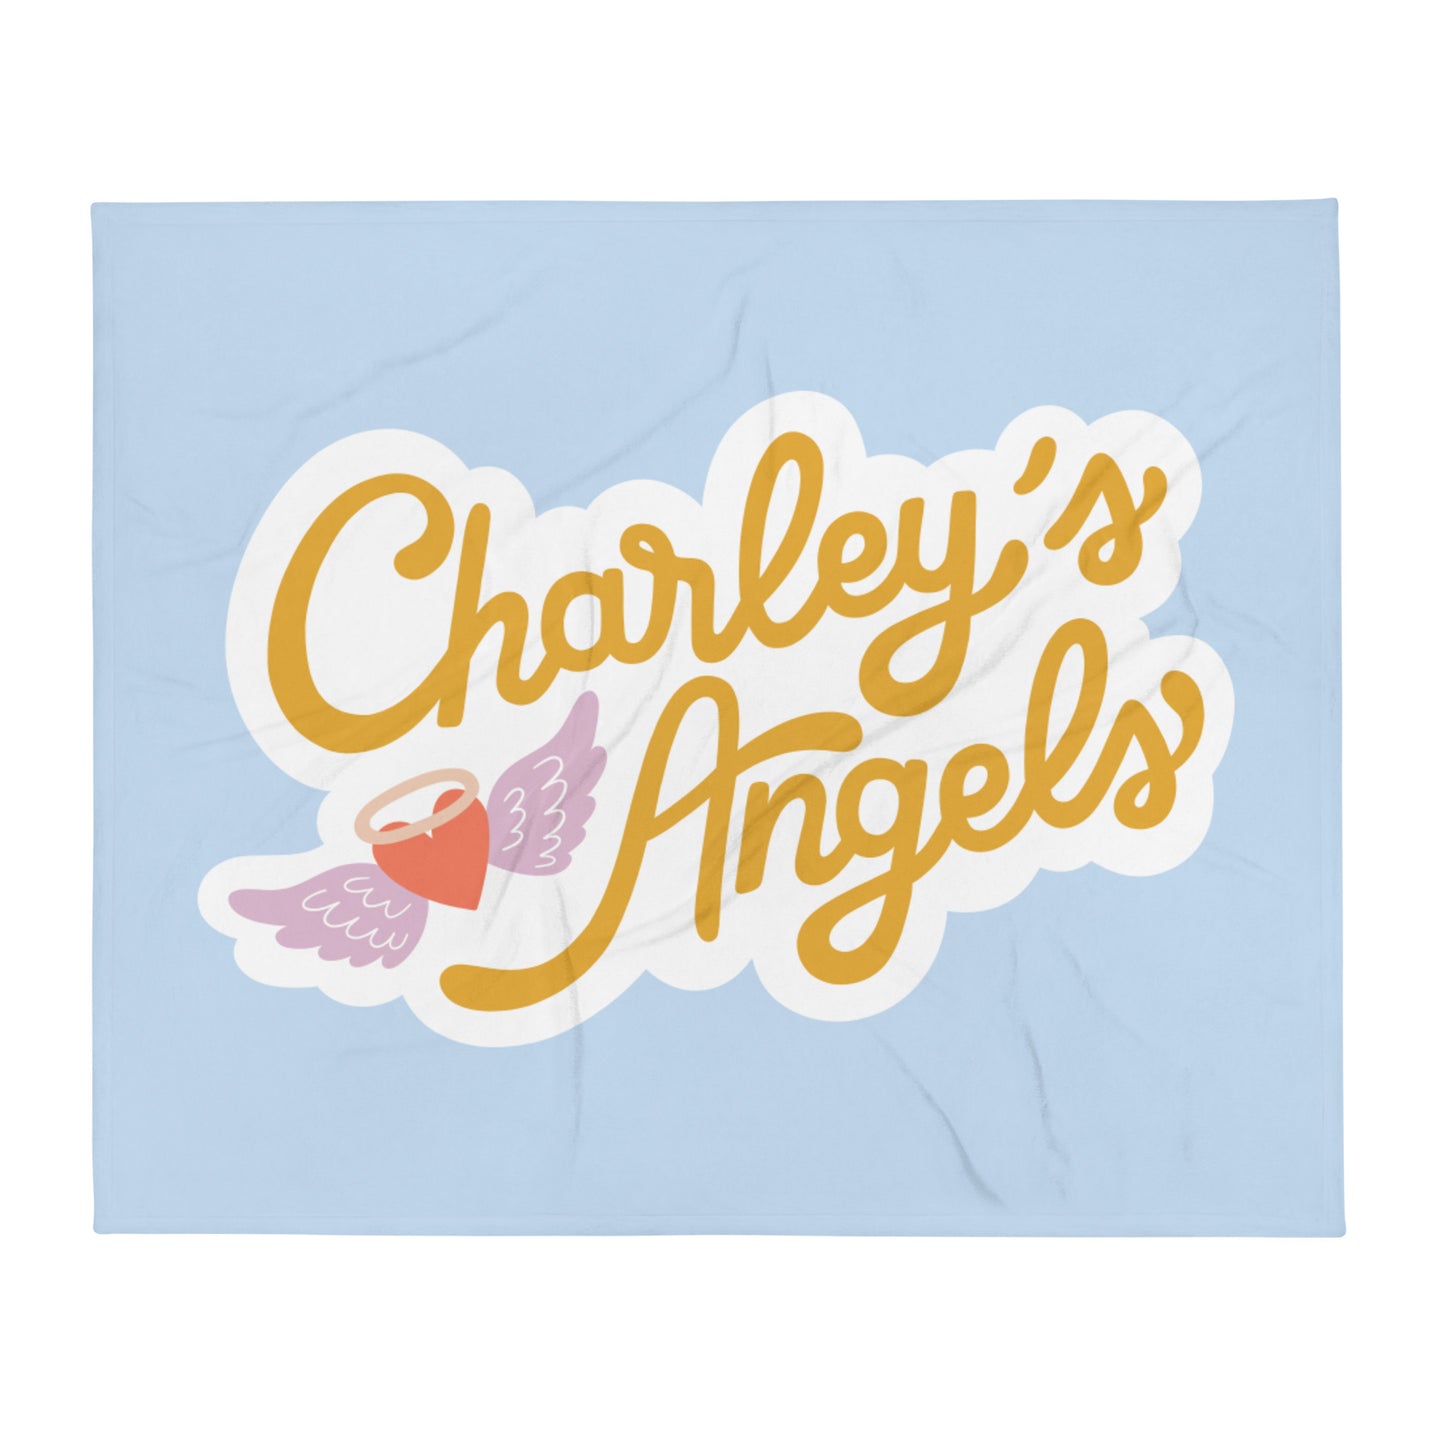 Charley's Angels — Fuzzy Throw Blanket